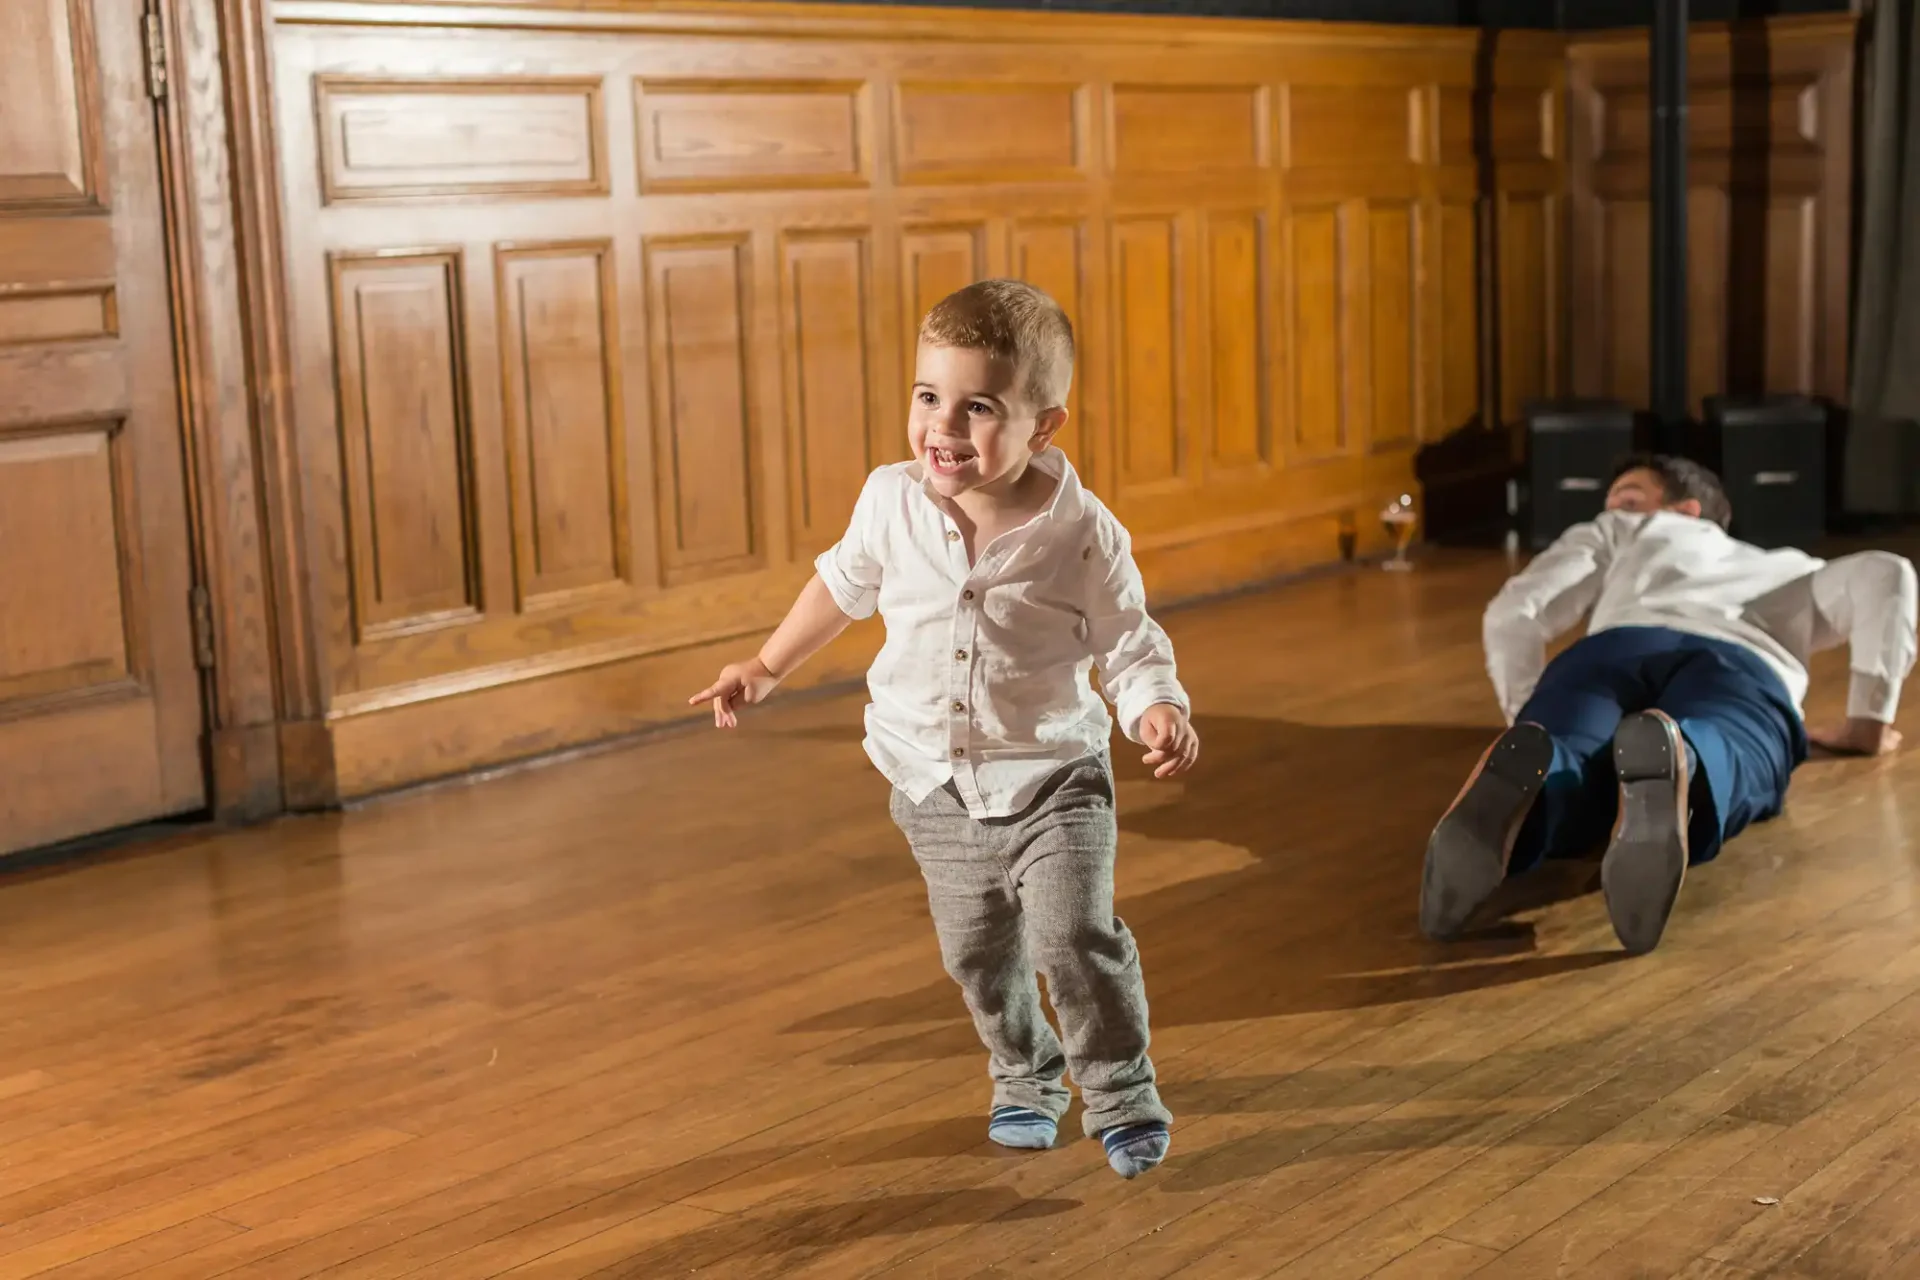 A young boy in a white shirt and jeans running joyfully in a wooden-paneled hall, with another child lying on the floor in the background.